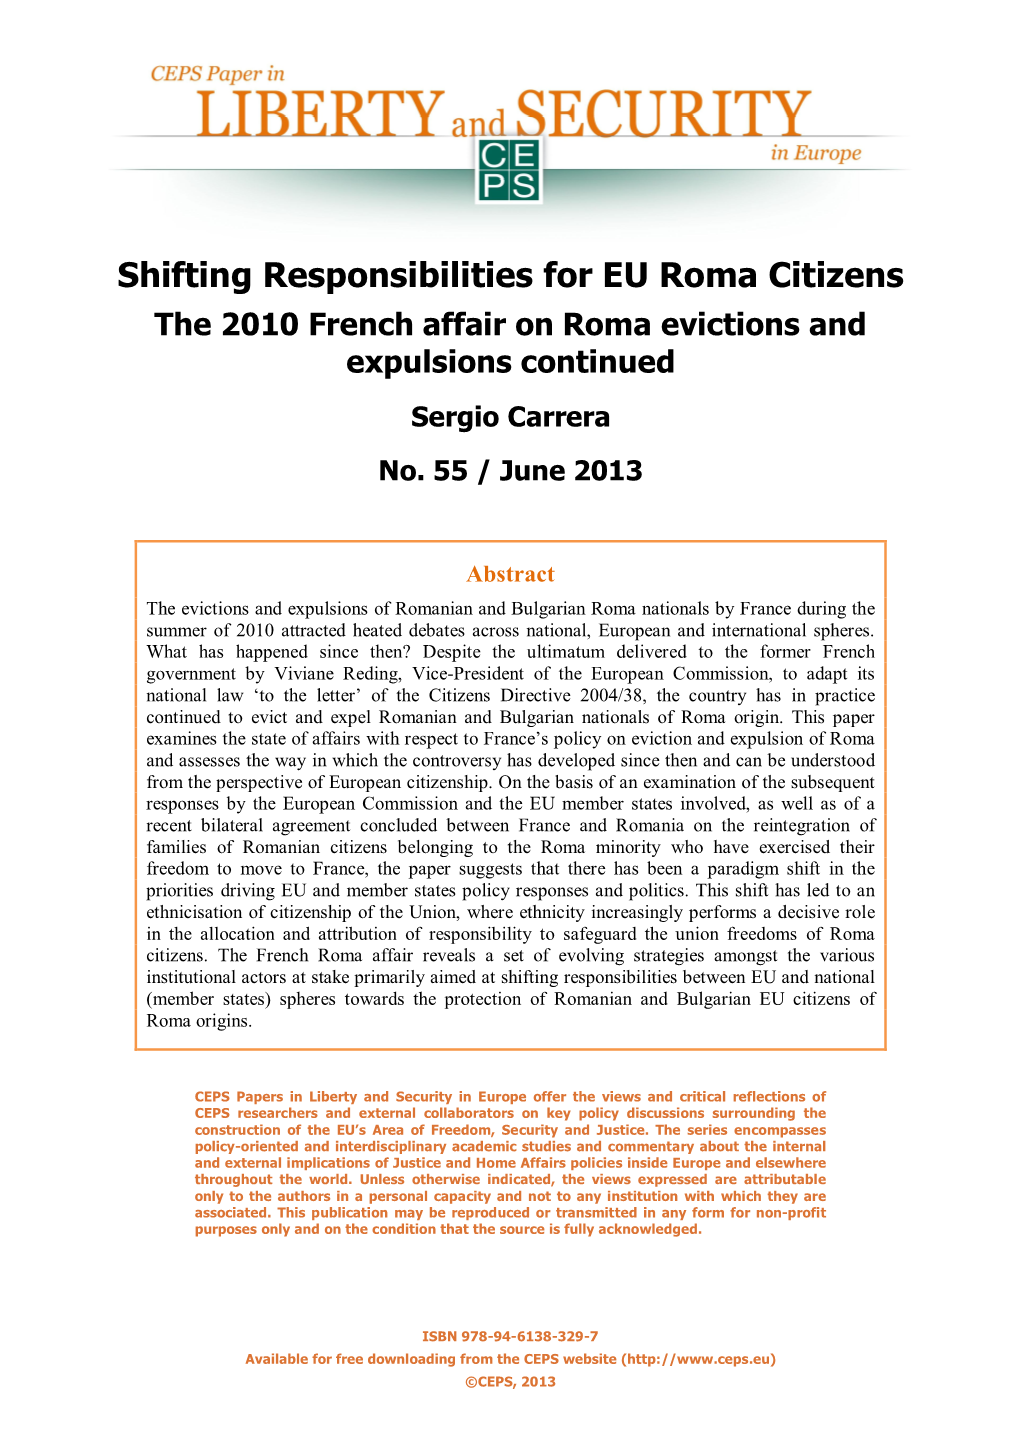 Shifting Responsibilities for EU Roma Citizens the 2010 French Affair on Roma Evictions and Expulsions Continued Sergio Carrera No